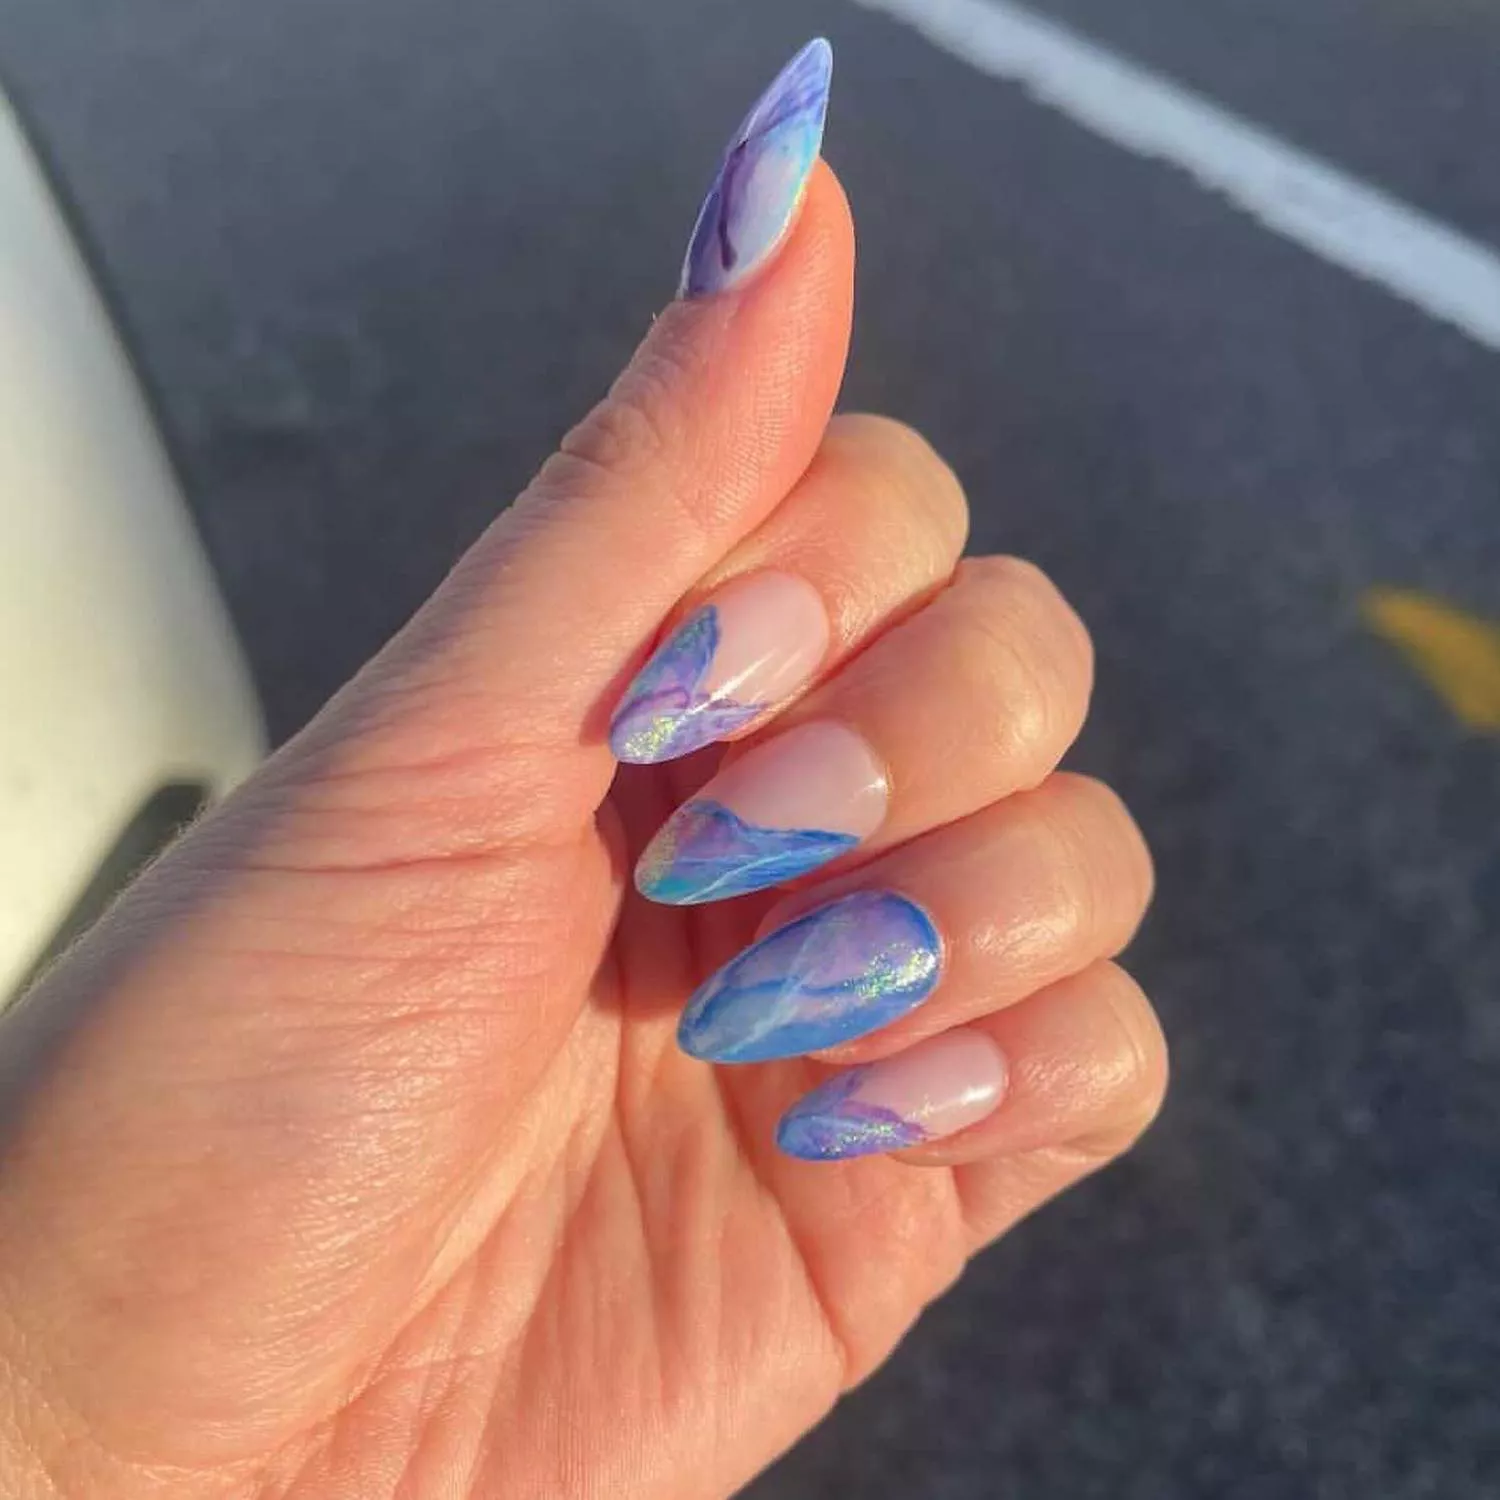 Manicure with chrome blue and purple abstract marbled details